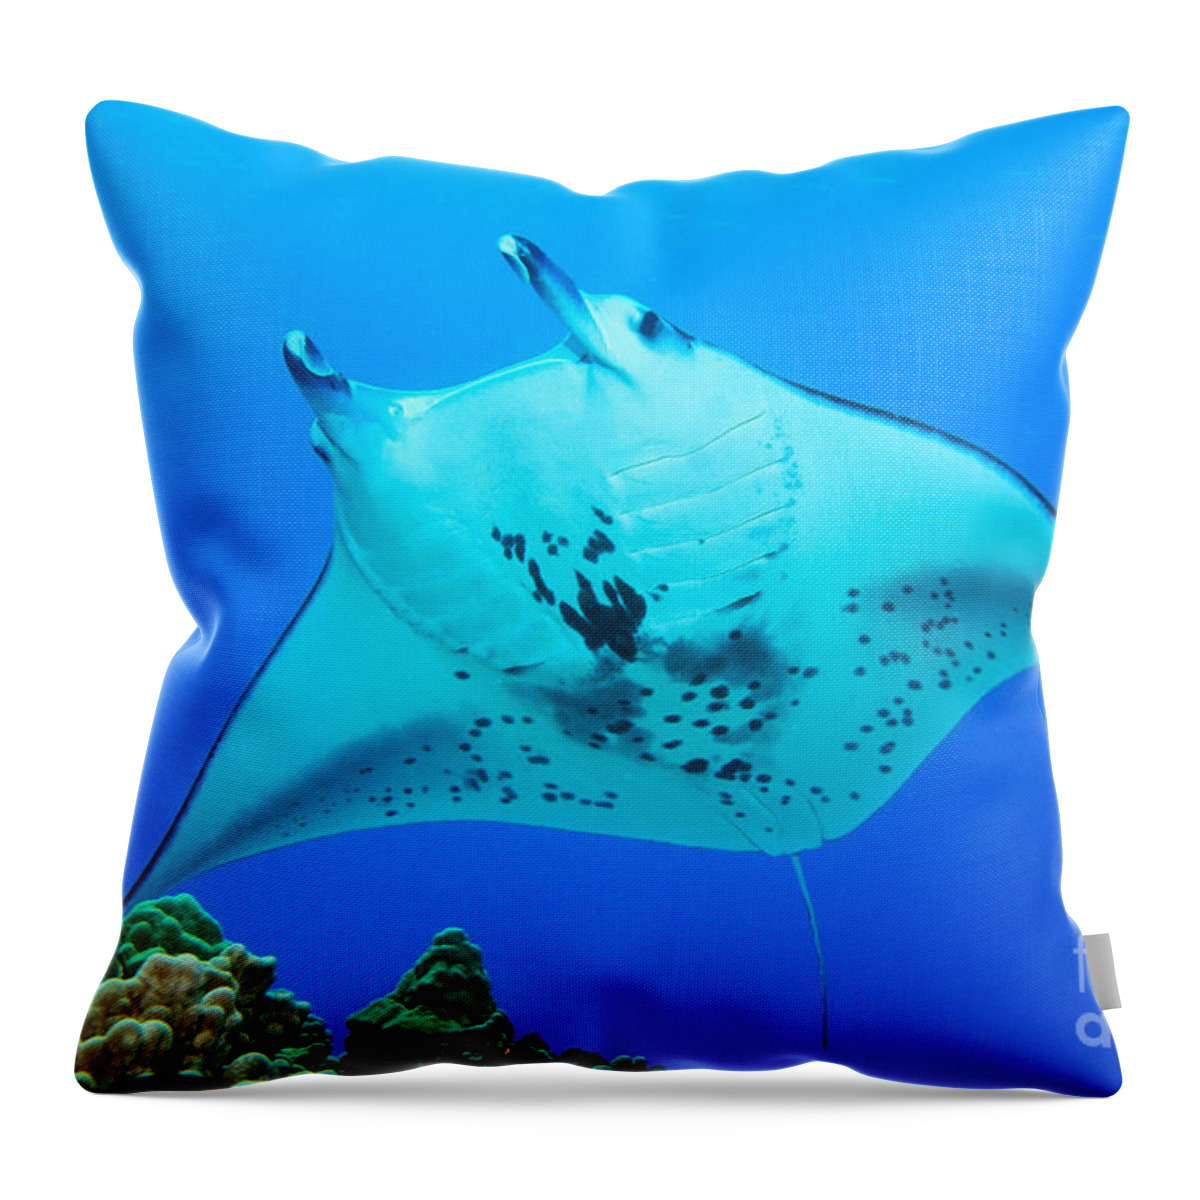 Manta Ray Throw Pillow featuring the photograph Freckles by Aaron Whittemore